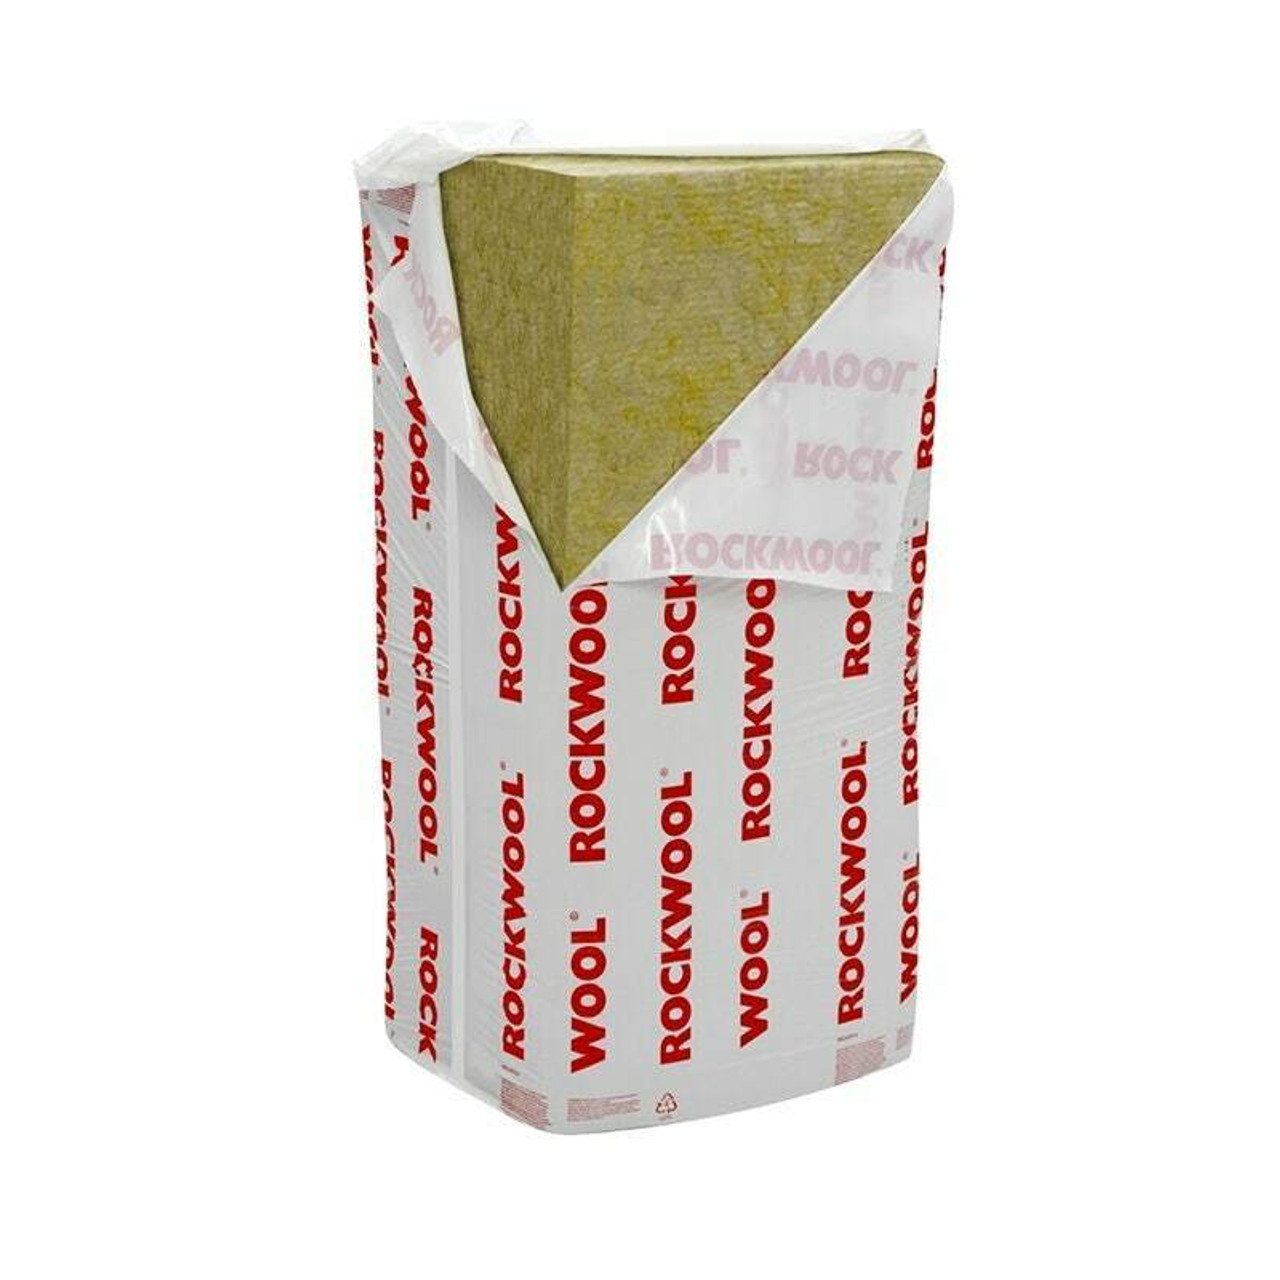 100mm - Rockwool Flexi Slab Acoustic Sound Insulation 1200mm x 600mm x 100mm - 4.32m2 Pack 10014964 RKW-50267